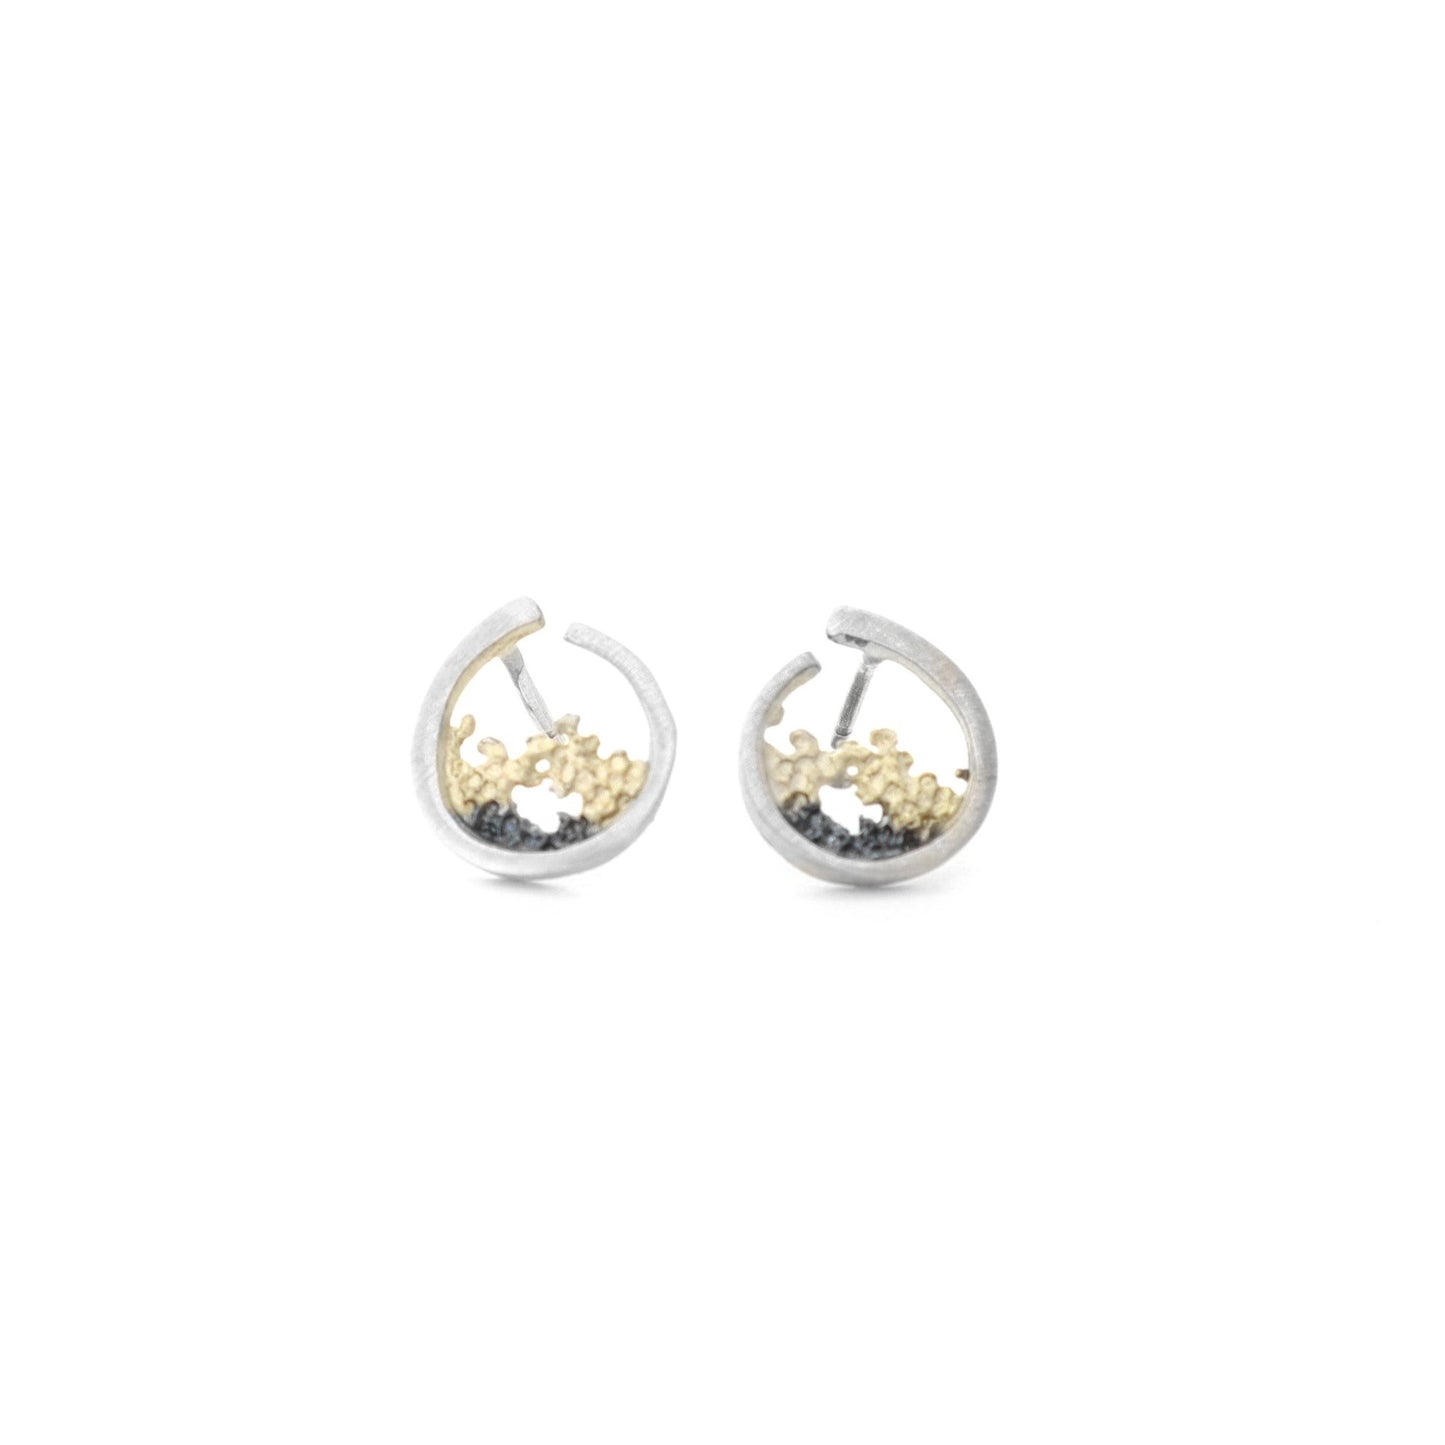 orfega mini wave earrings in gold, sterling silver and natural pigments